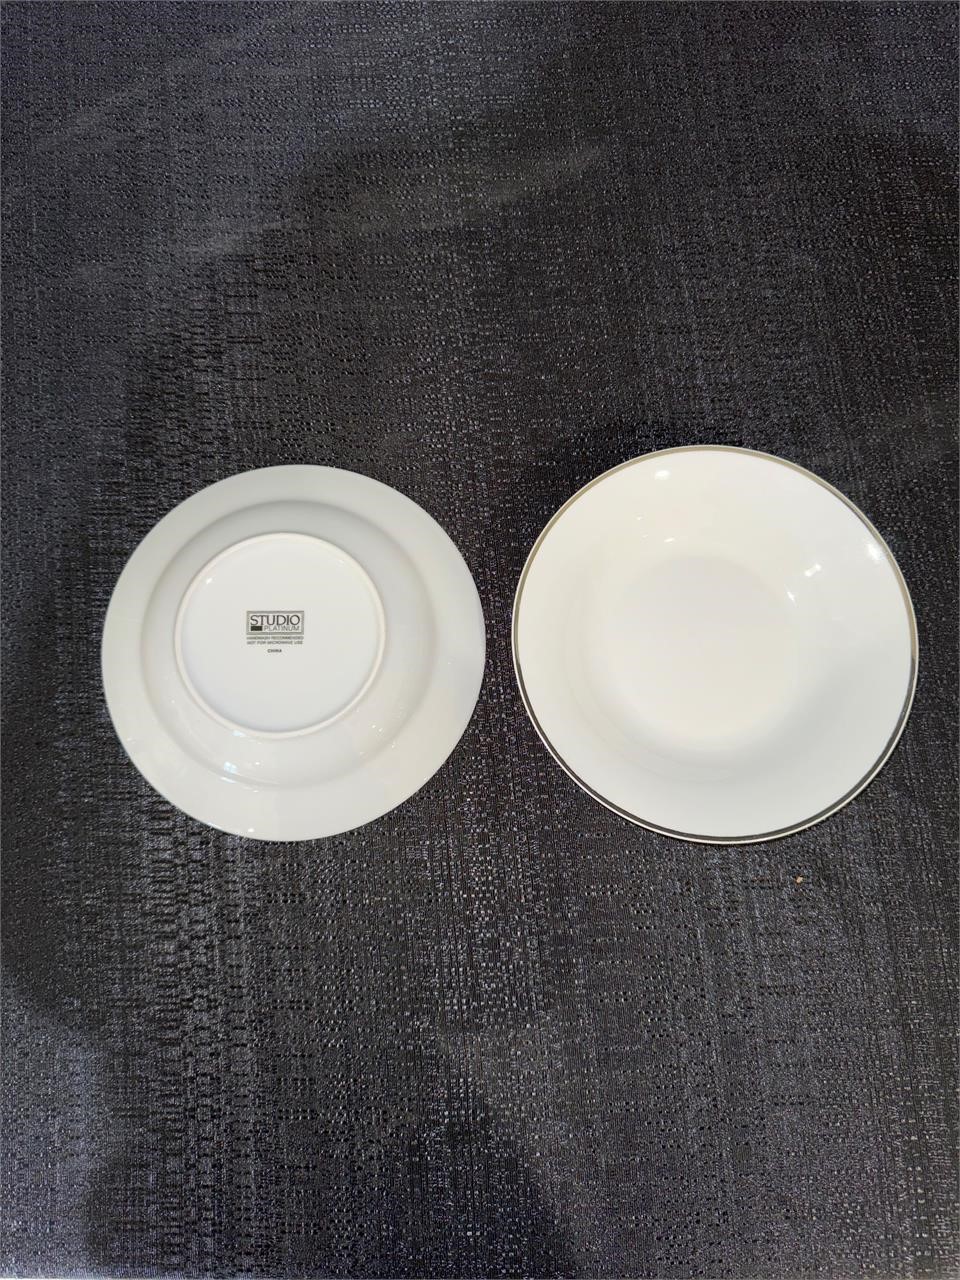 China Soup Bowls, Dinner Plates, and Lunch Plates